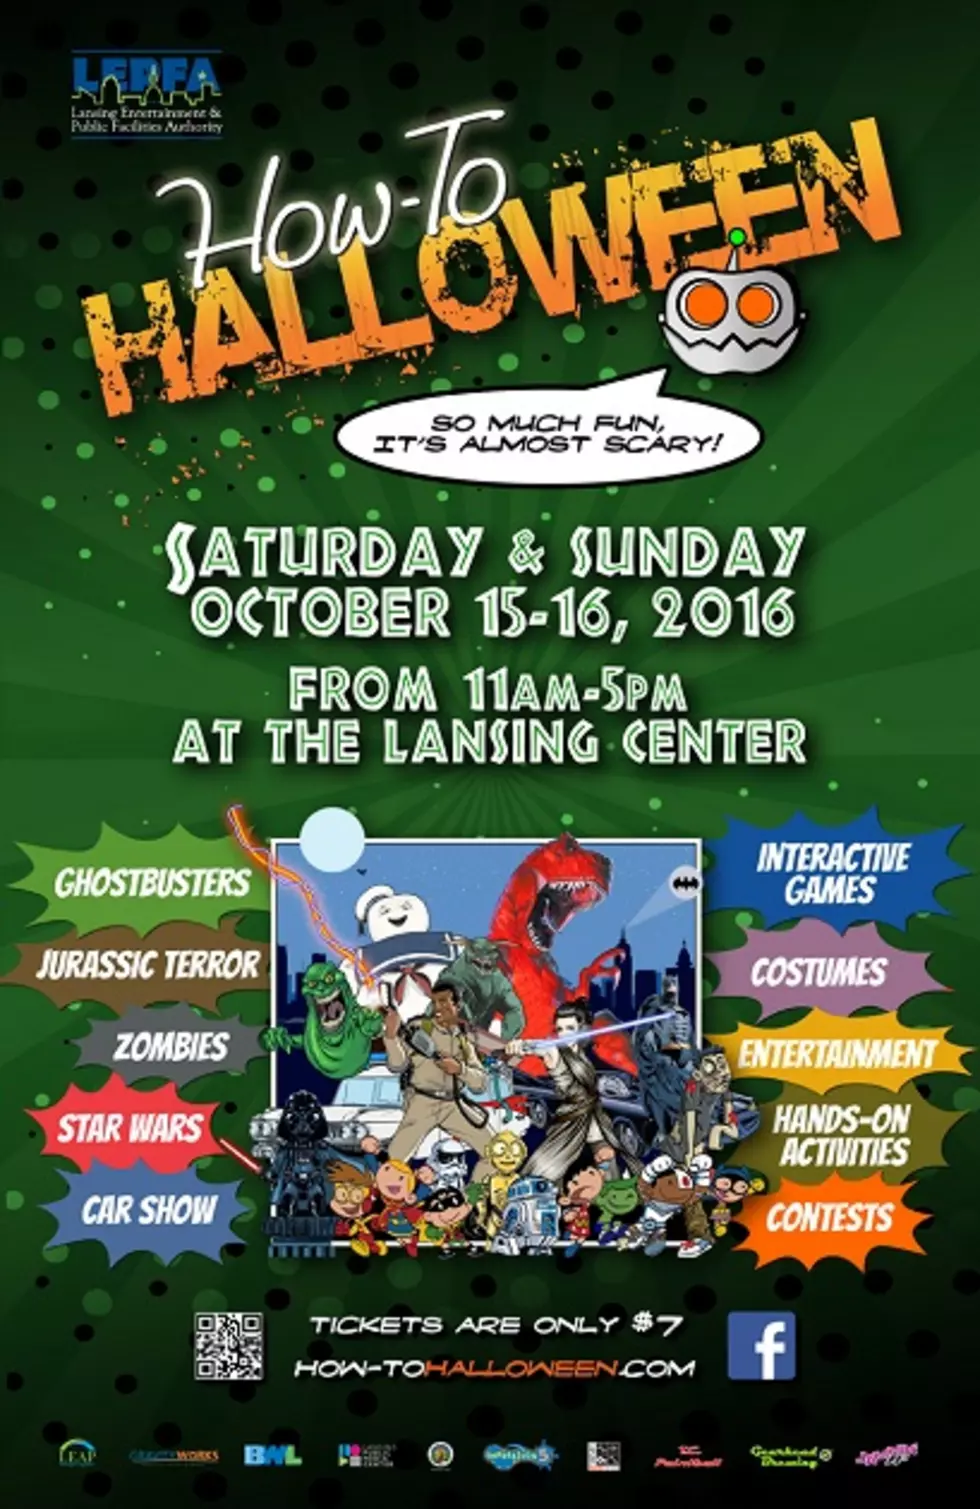 Make Your Own Halloween Scares at the Lansing Center This Weekend